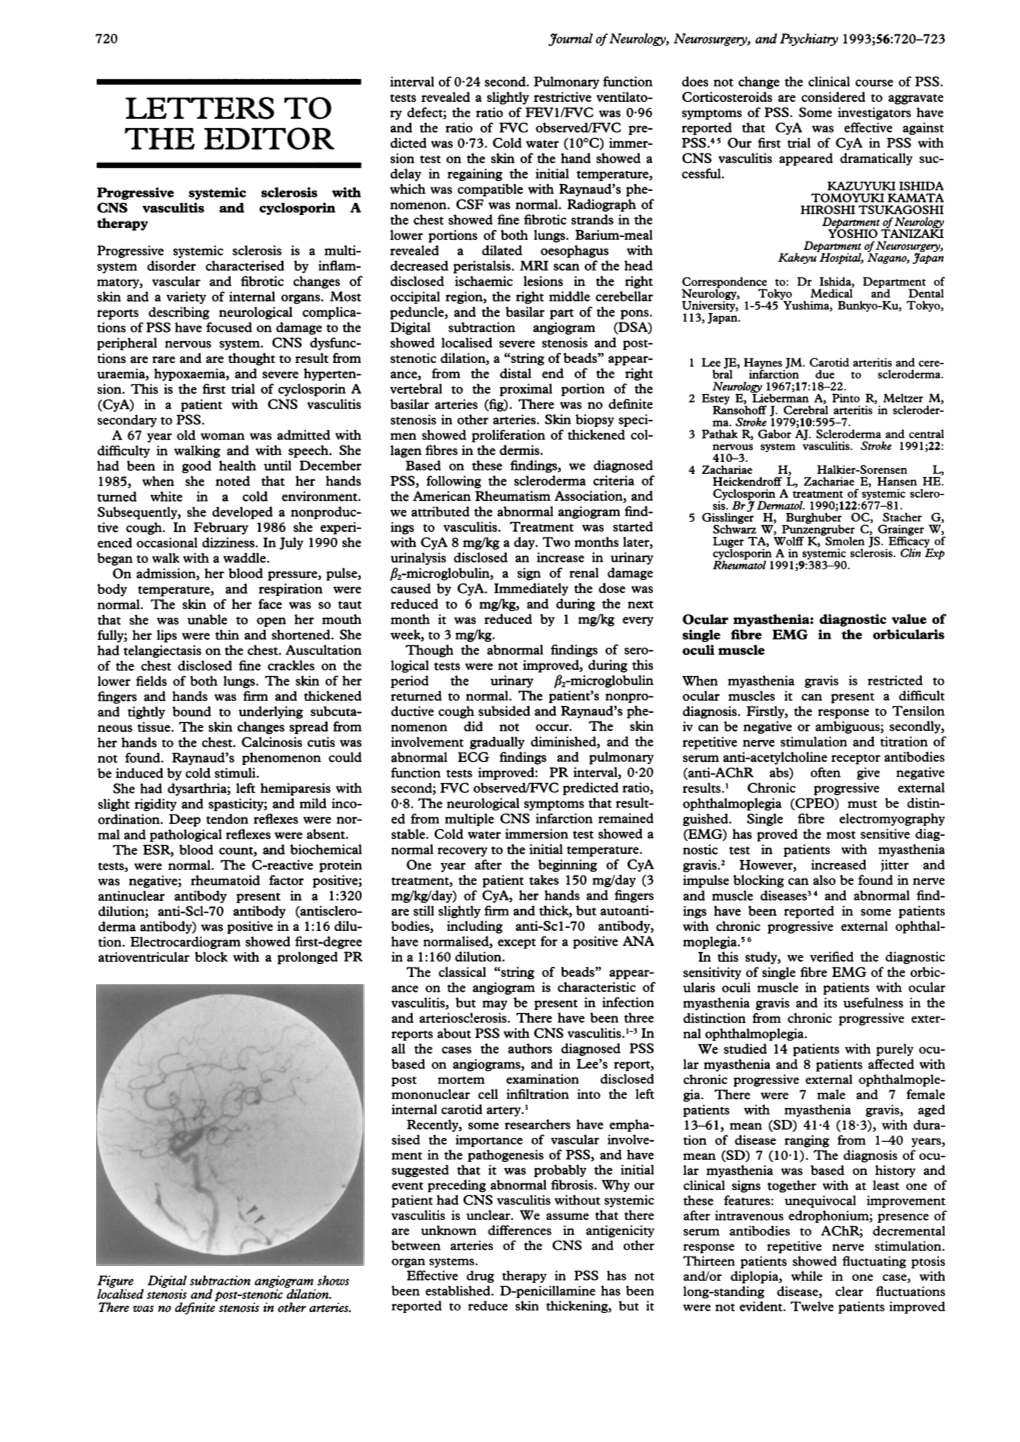 Letters to the Editor 721 Considerably on the Tensilon Test, Six Had Ocular Form of the Disease